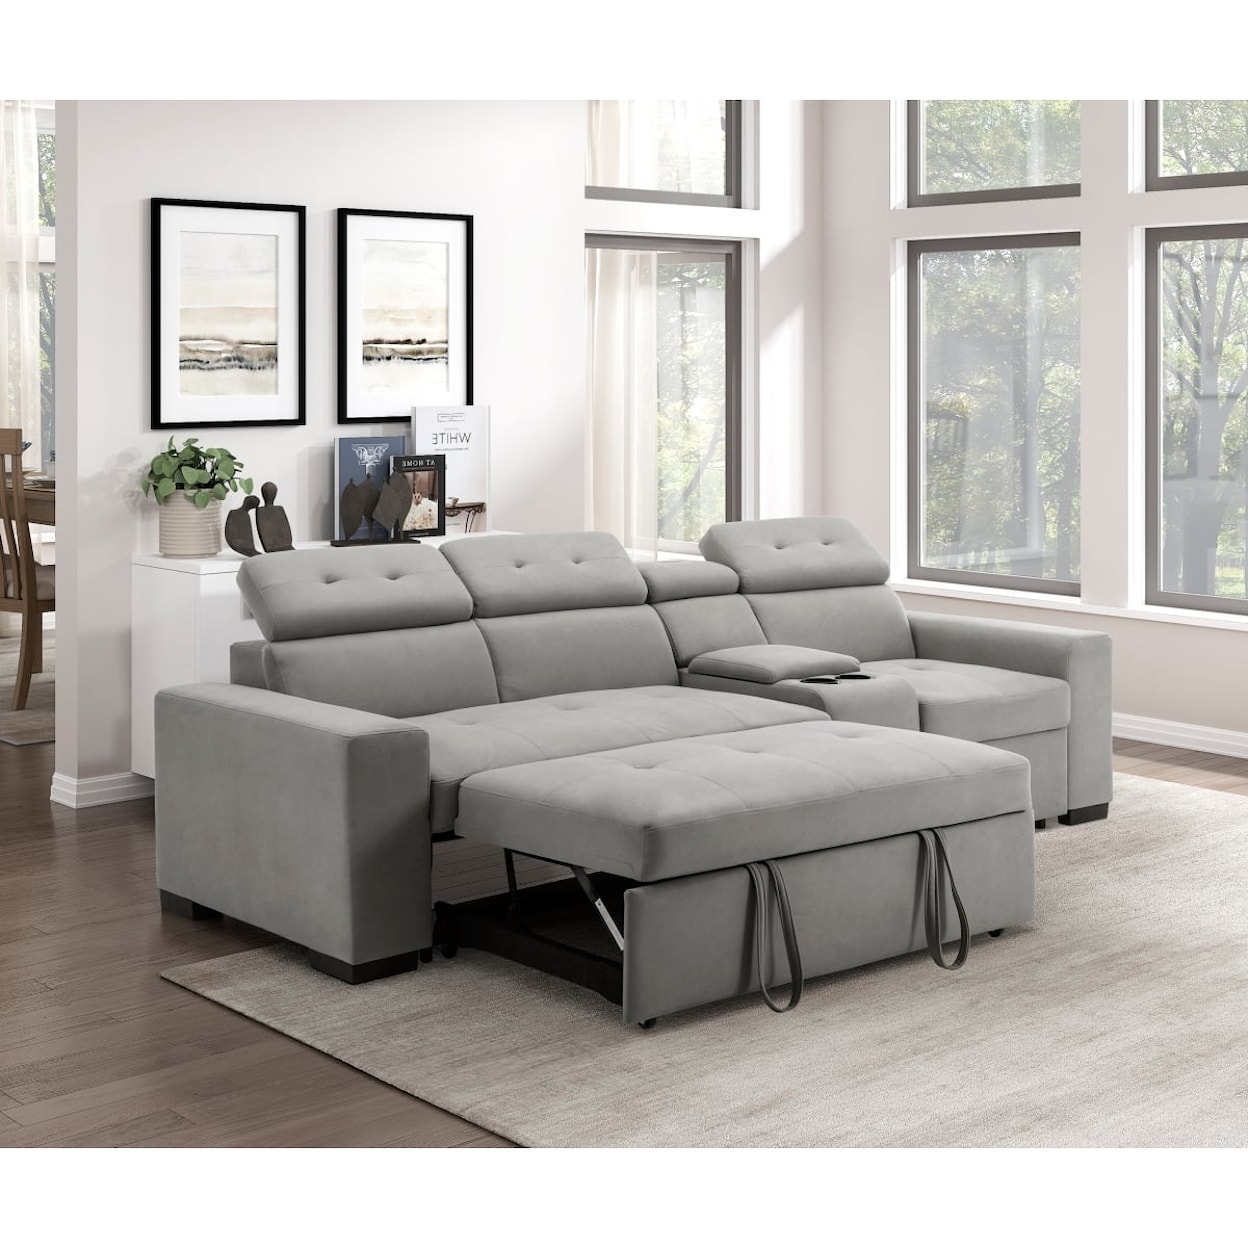 Homelegance Furniture Farrah 2-Piece Sofa with Right Console